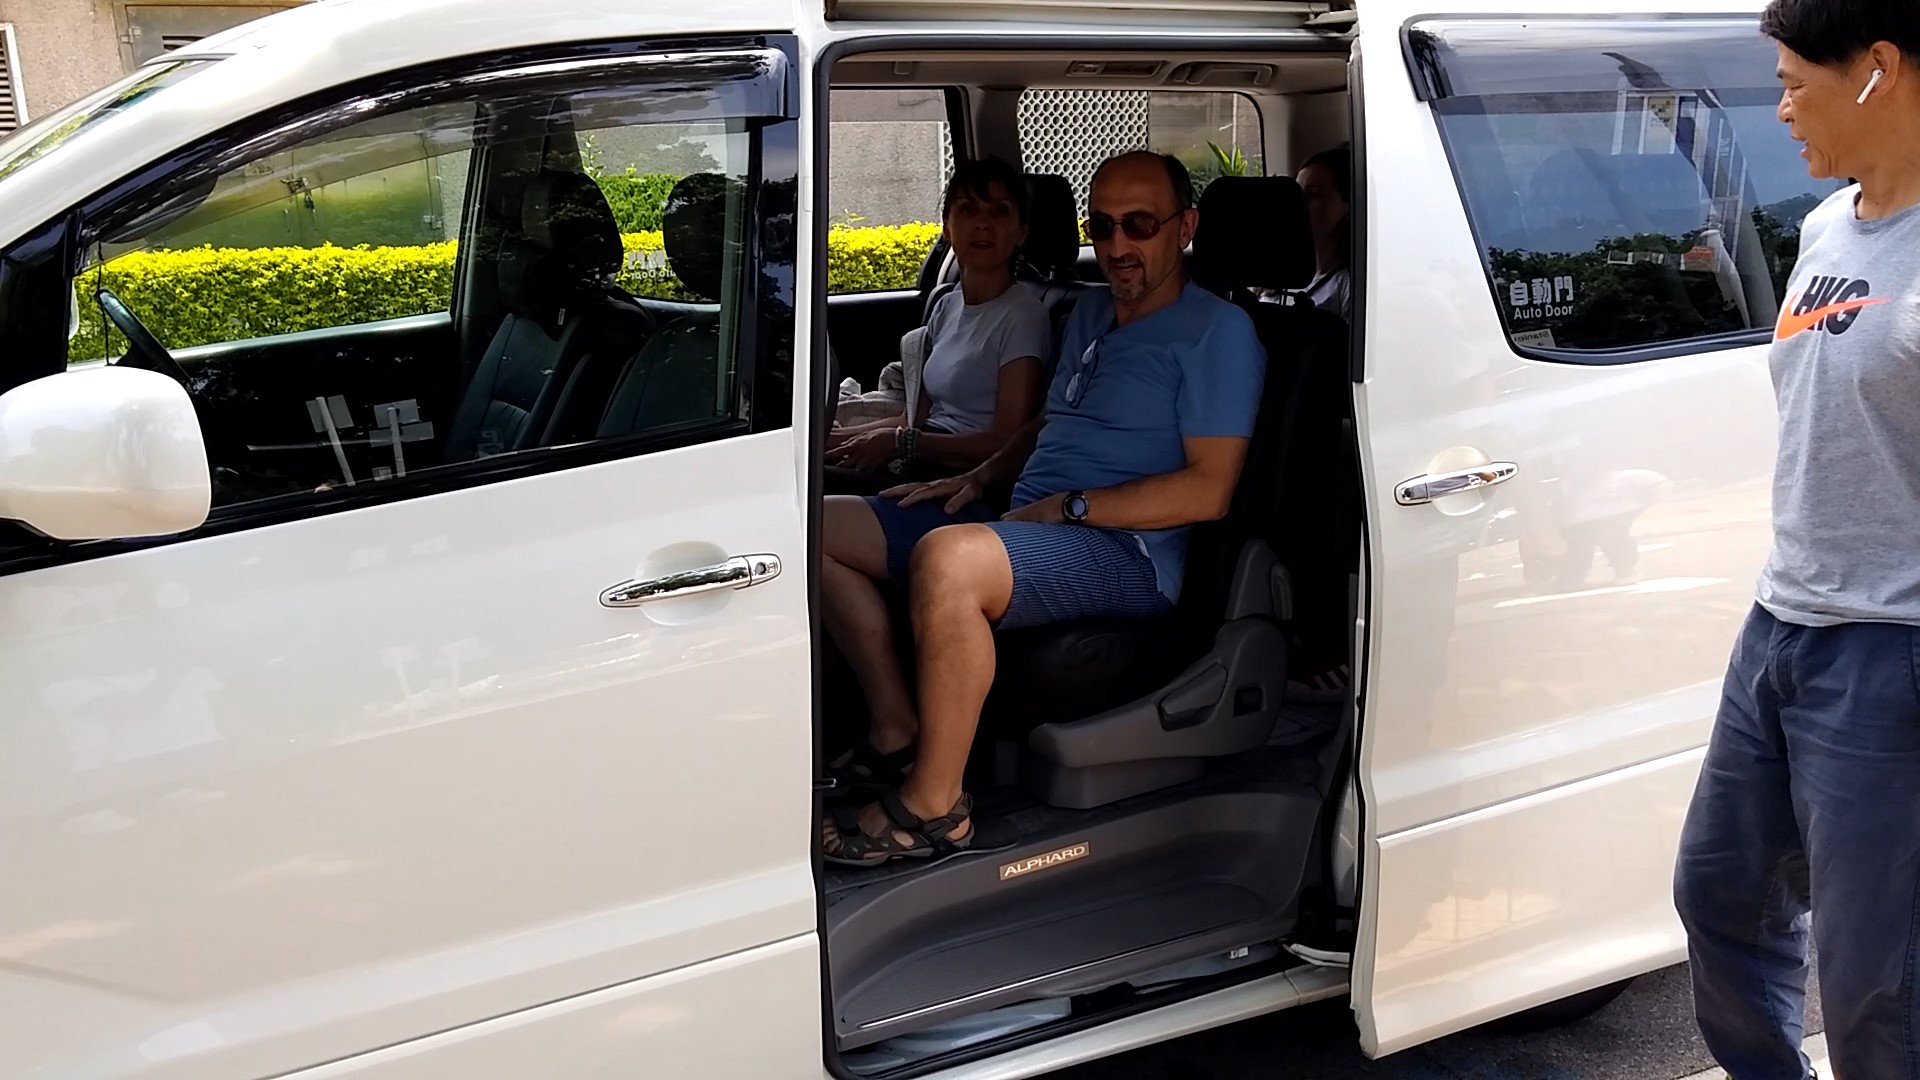 Even tall men get enough legroom in the Toyota Alphard.